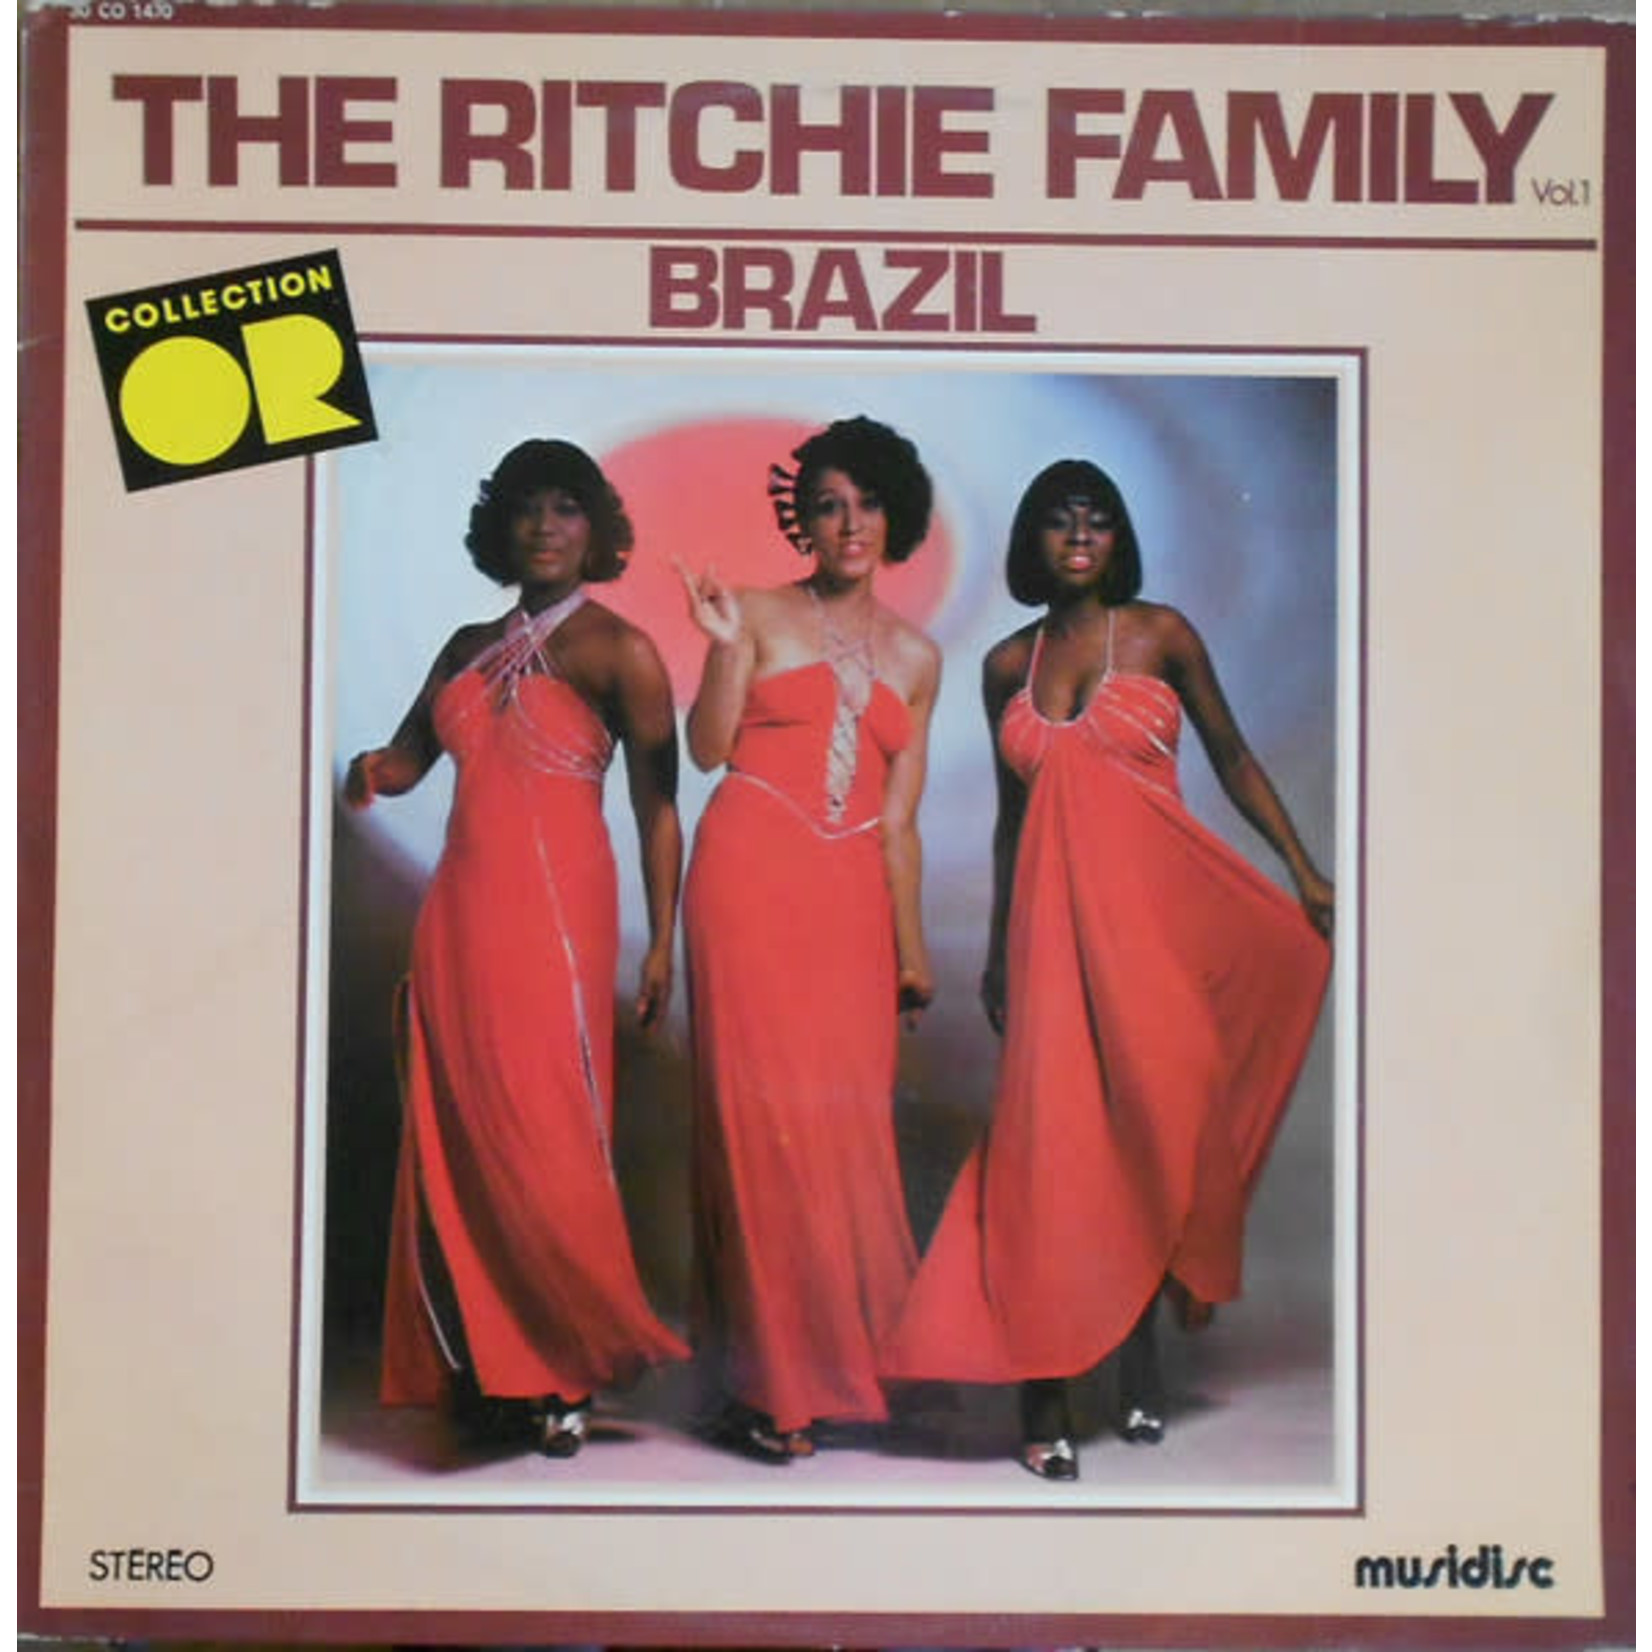 The Ritchie Family – The Ritchie Family Vol. 1 - Brazil LP